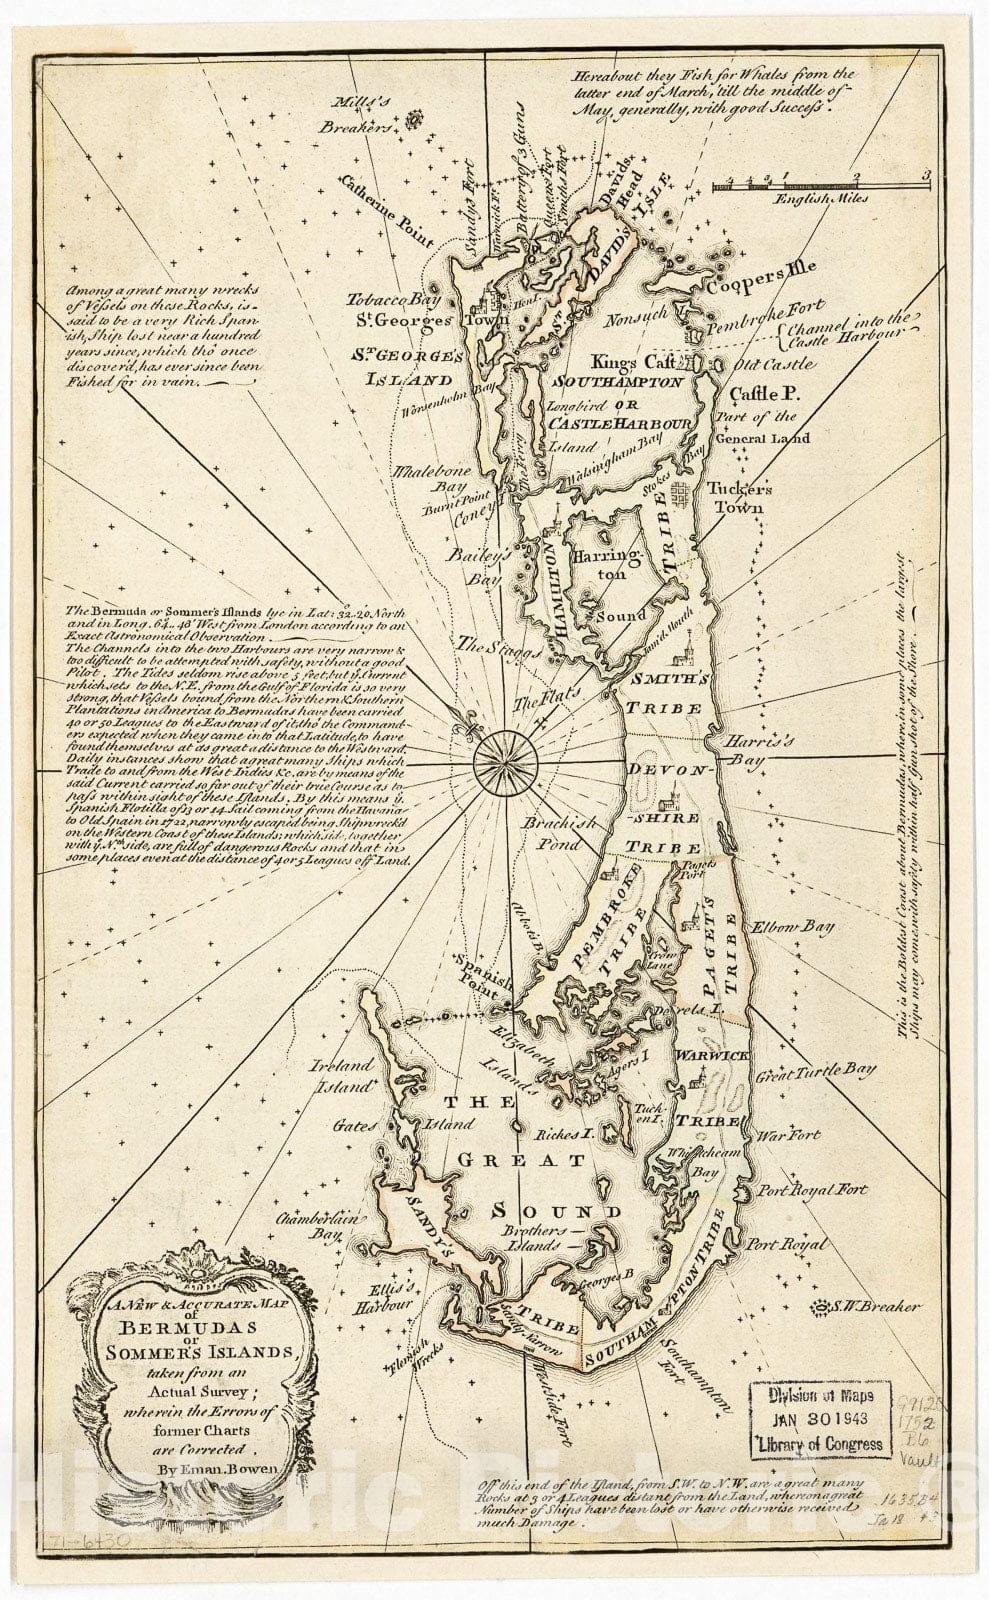 Historic 1750 Map - A New & Accurate map of Bermudas or Sommer's Islands, Taken from an Actual Survey; wherein The Errors of Former Charts are Corrected.